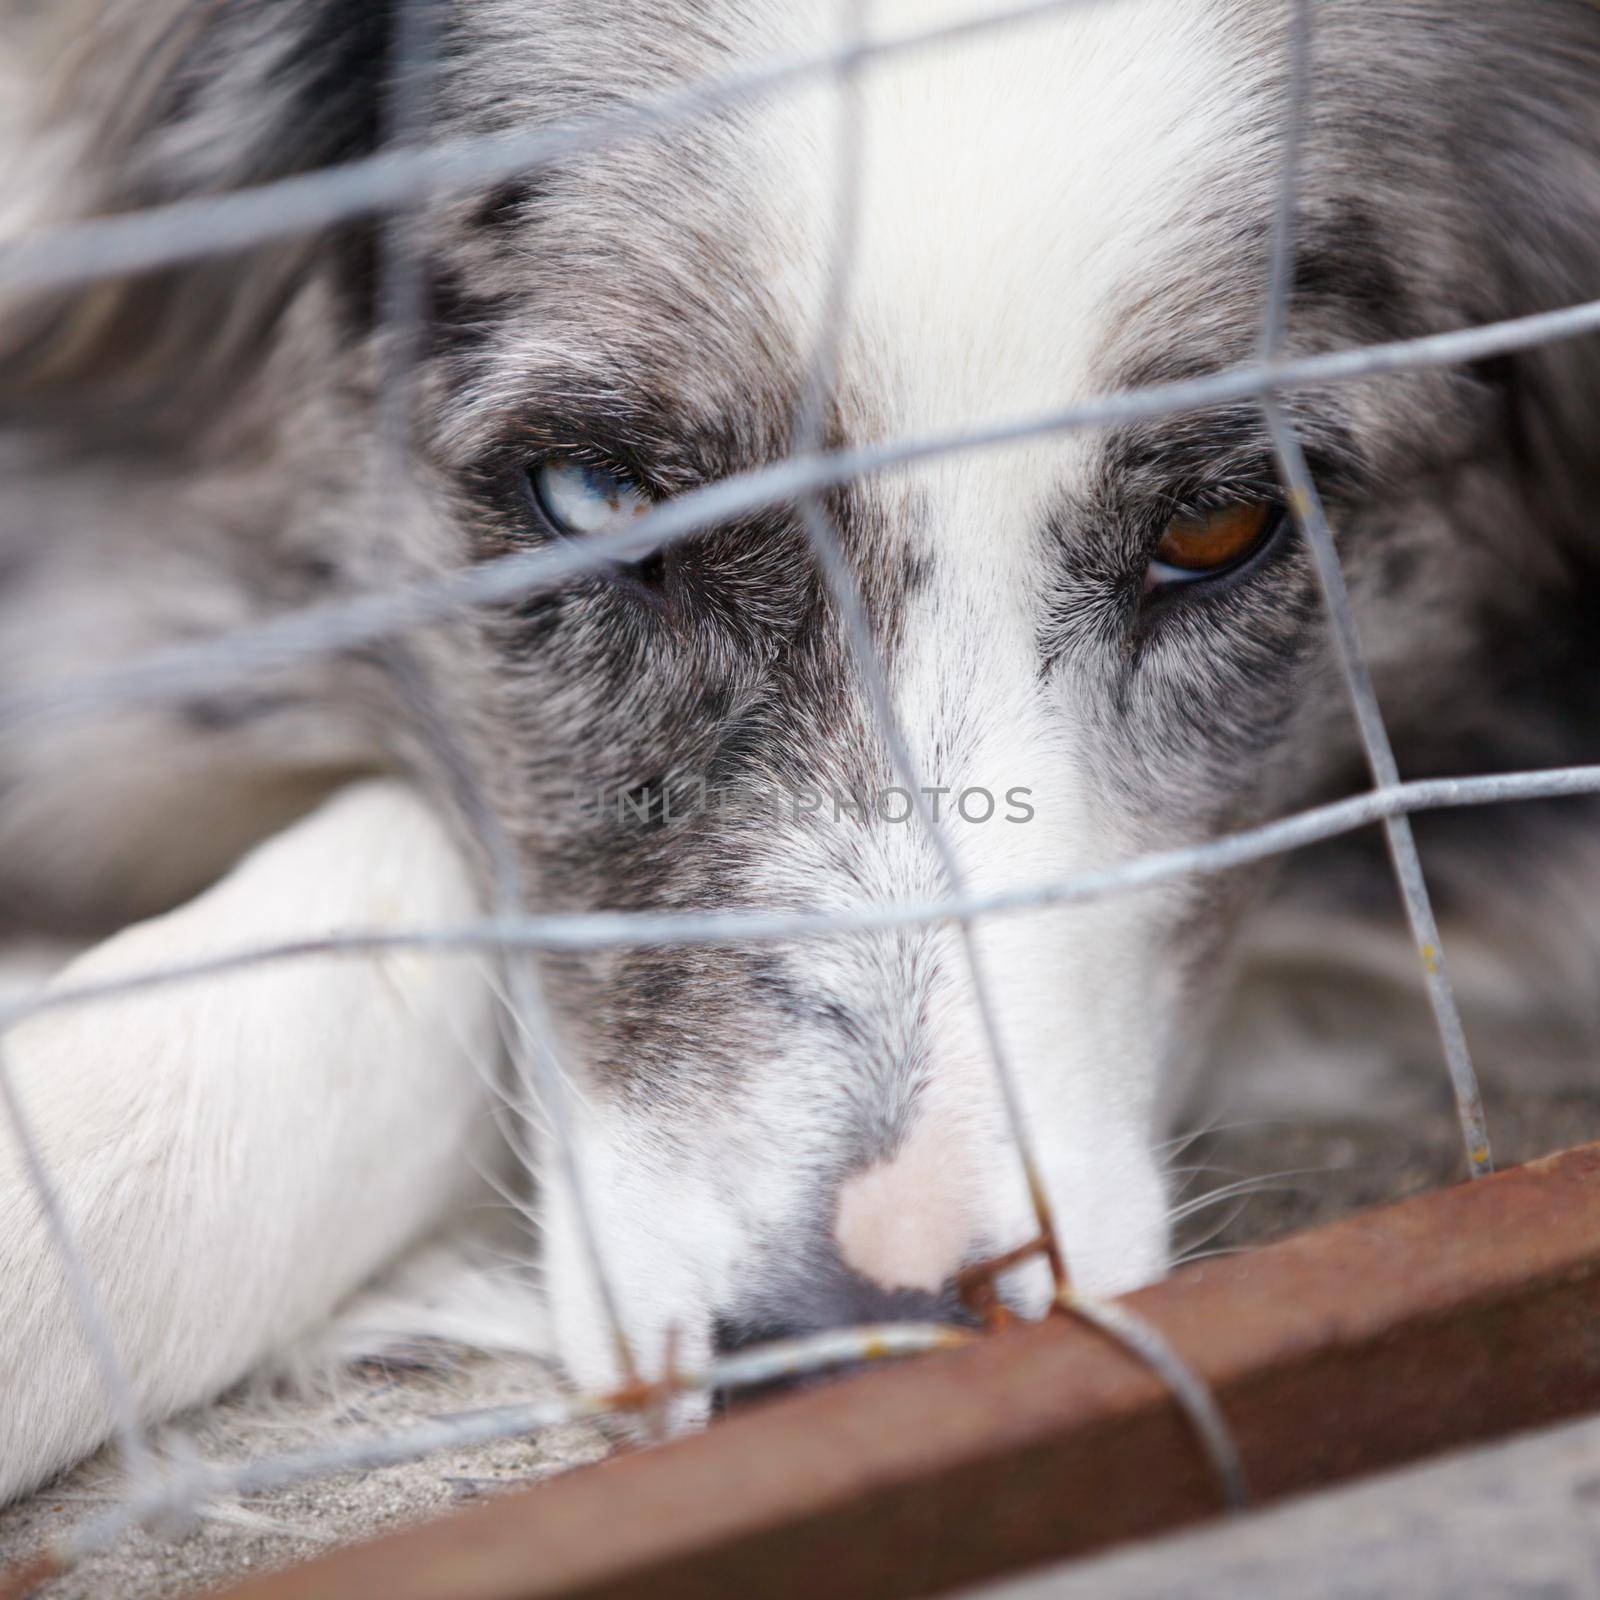 Abandoned and alone. A close up of a very sad looking dog looking through the bars of the cage. by YuriArcurs